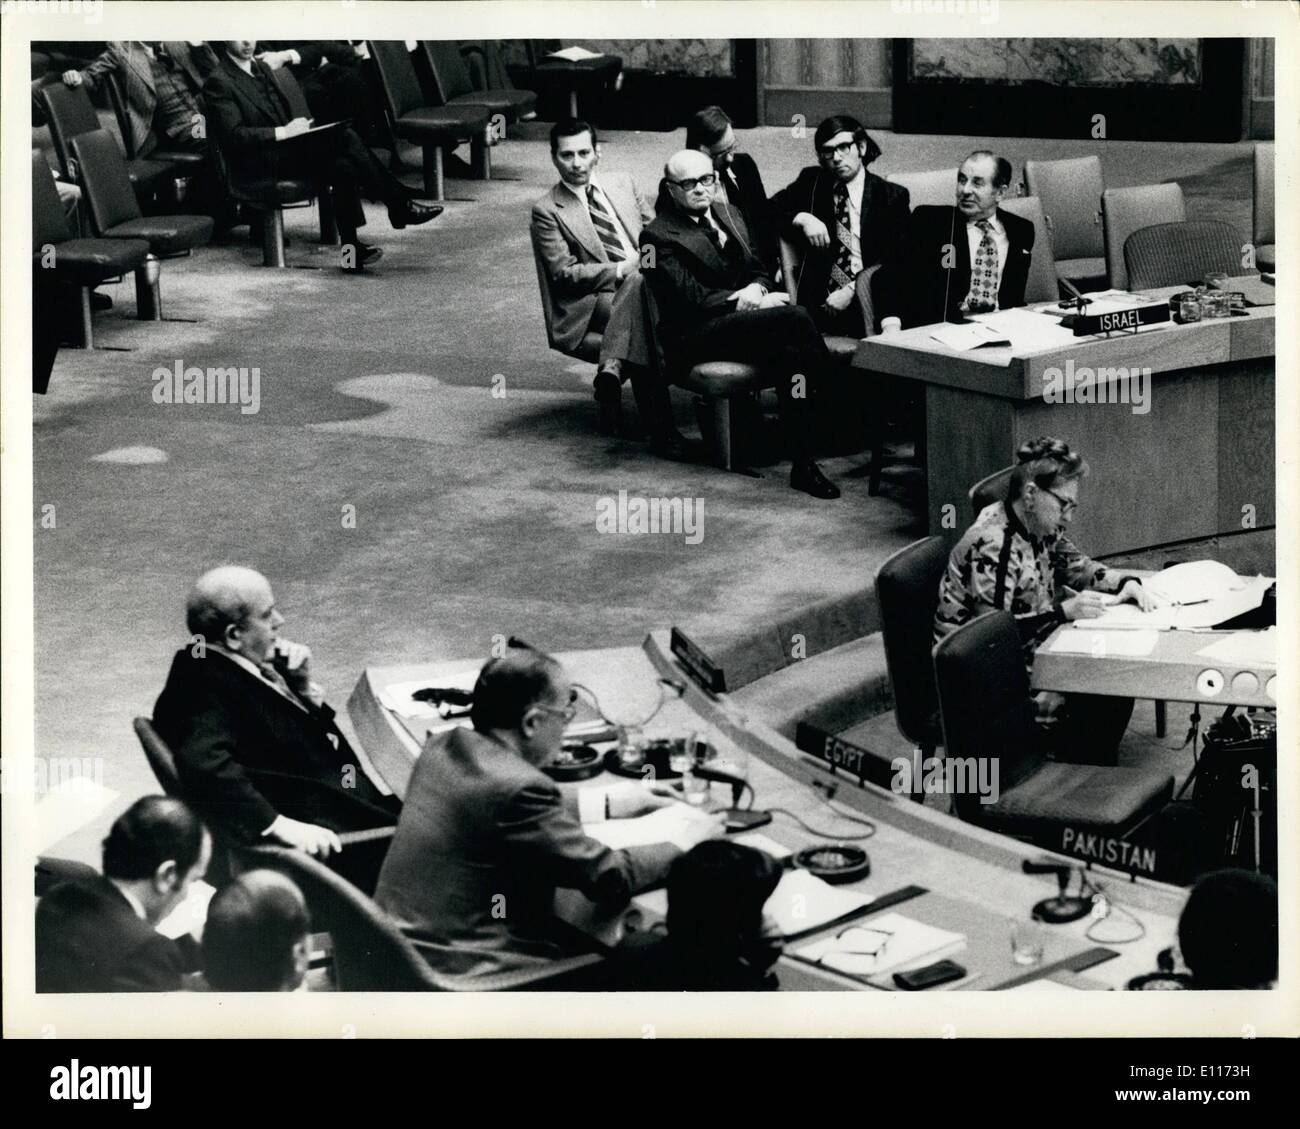 Mar. 03, 1976 - Captain ambassador to the united nations, Ahmed Esmat Abdel Meguid, (lower left) speaking against Israeli occupation of the west bank, to his left is zehdi labib Terza, anting observe of the P.L.O. at the u.n. across the aisle is chai herzag the Israeli representative. This is the first time that both Israel and the P.L.O. have participated in a security council debate. The council was discussing anti- isrlaelivnrest on the occupied west bank of Jordan. Stock Photo